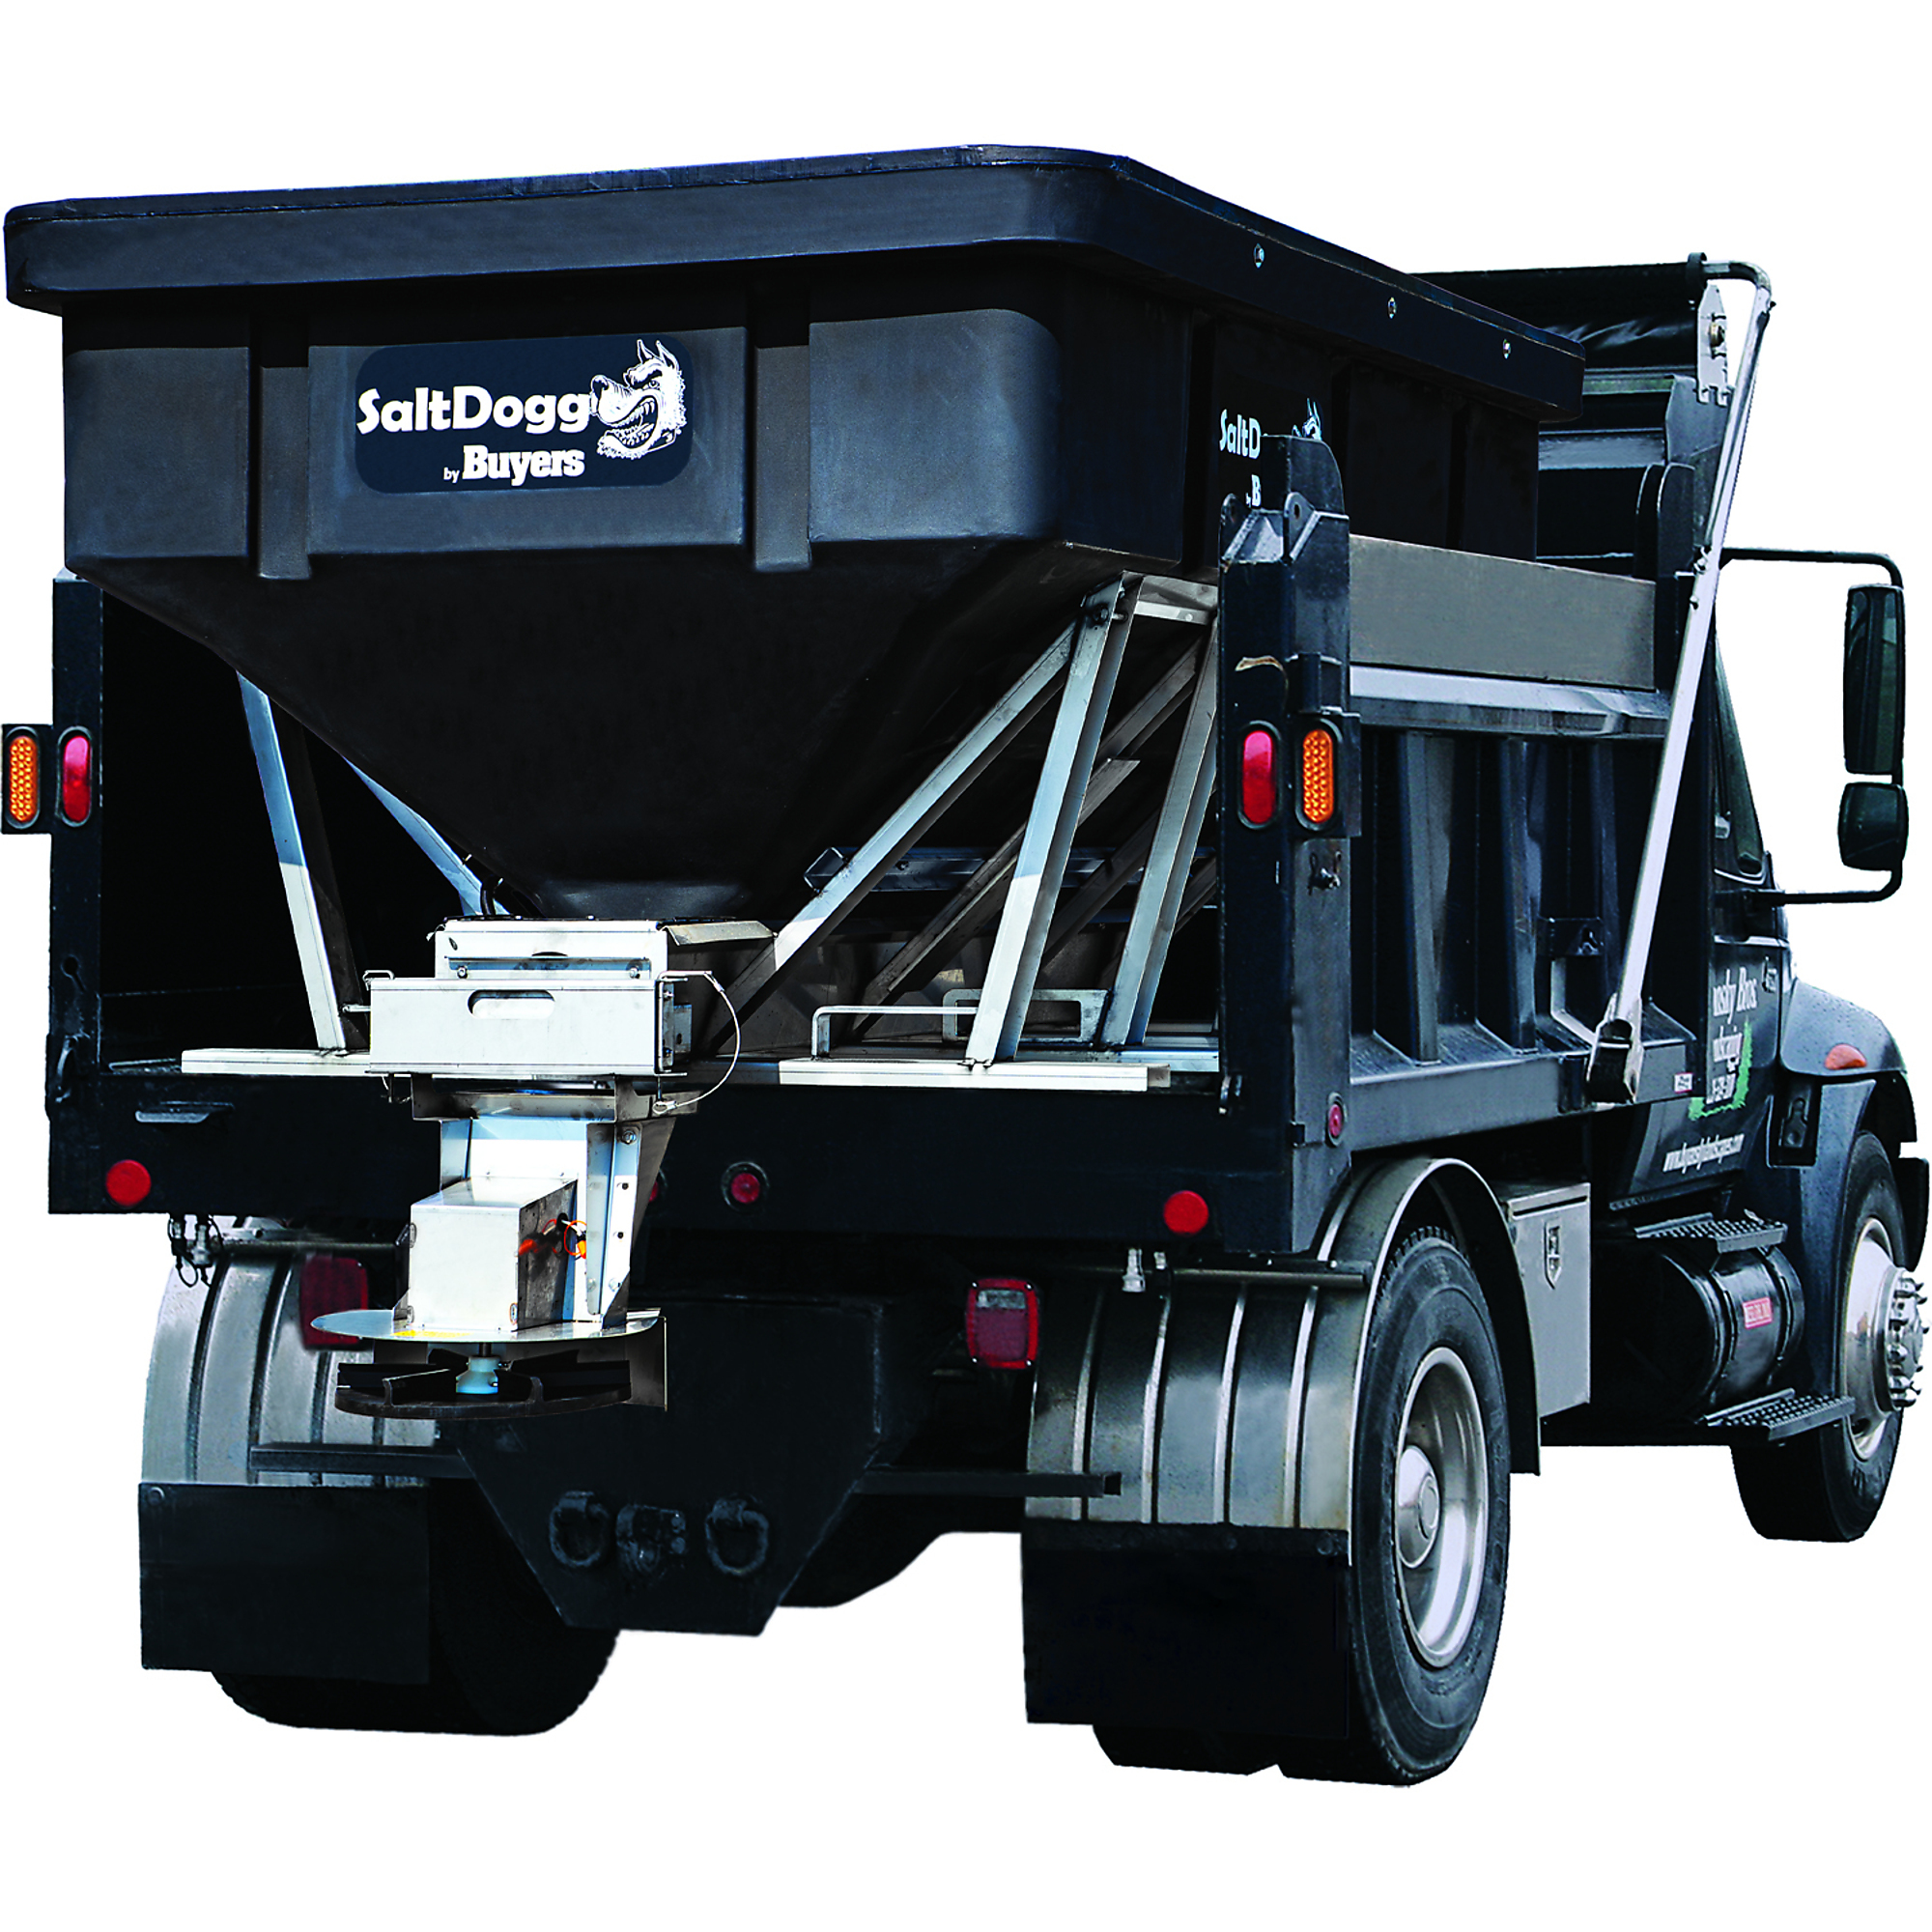 Buyers Products, 6.0 Cubic Yard Electric Black Poly Hopper Spreader, Max. Spread Width 30 ft, Model PRO6000CH